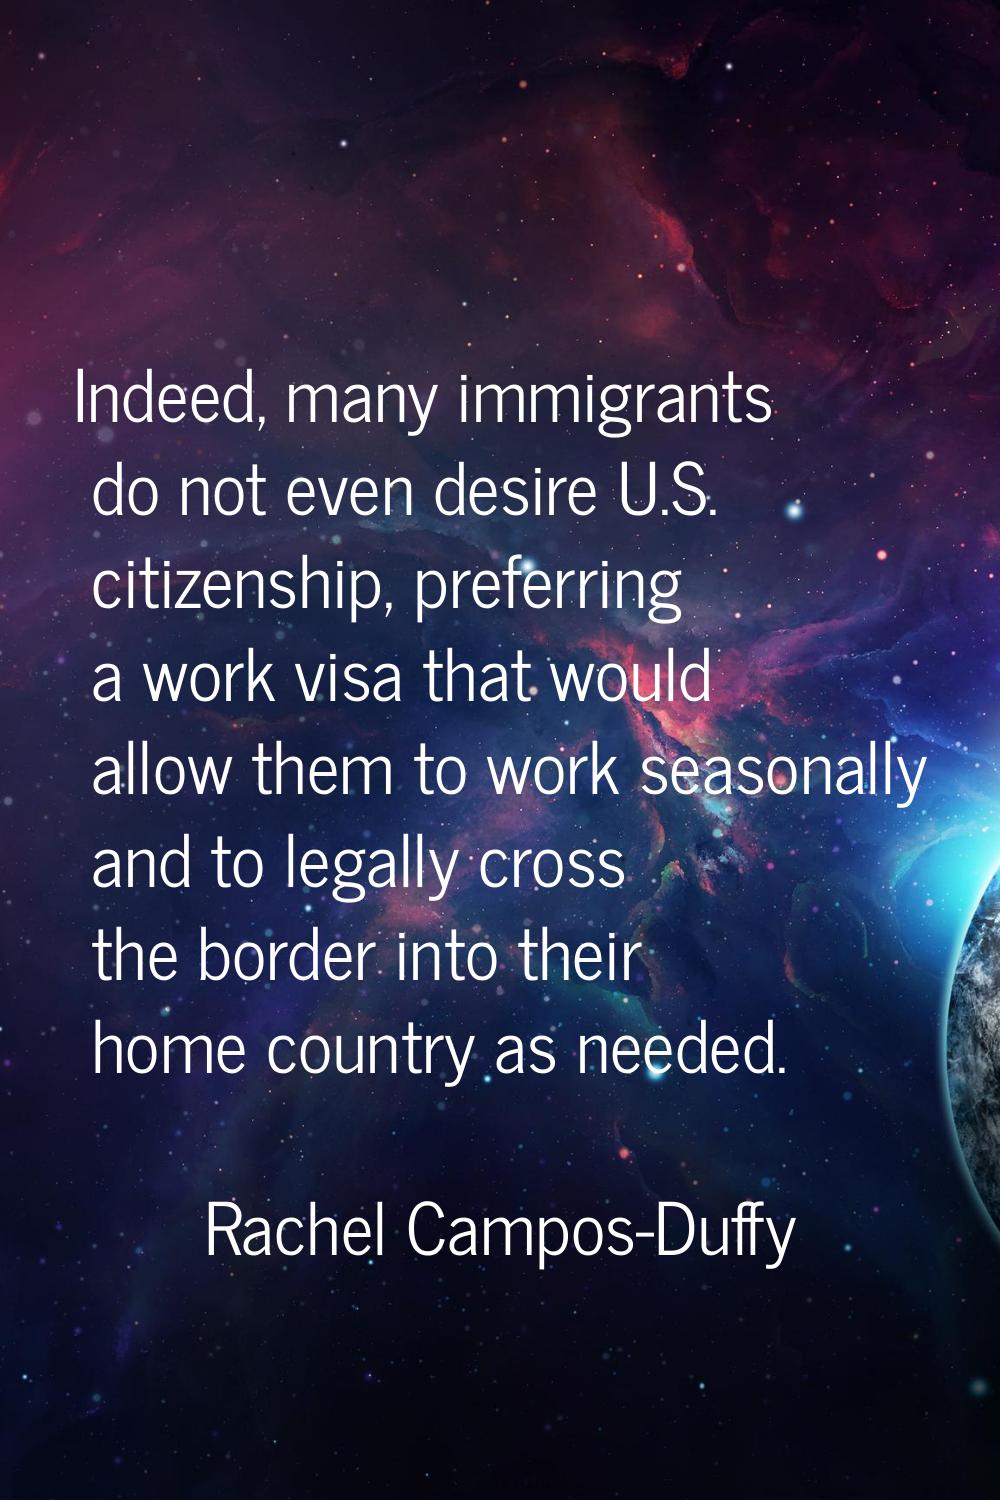 Indeed, many immigrants do not even desire U.S. citizenship, preferring a work visa that would allo